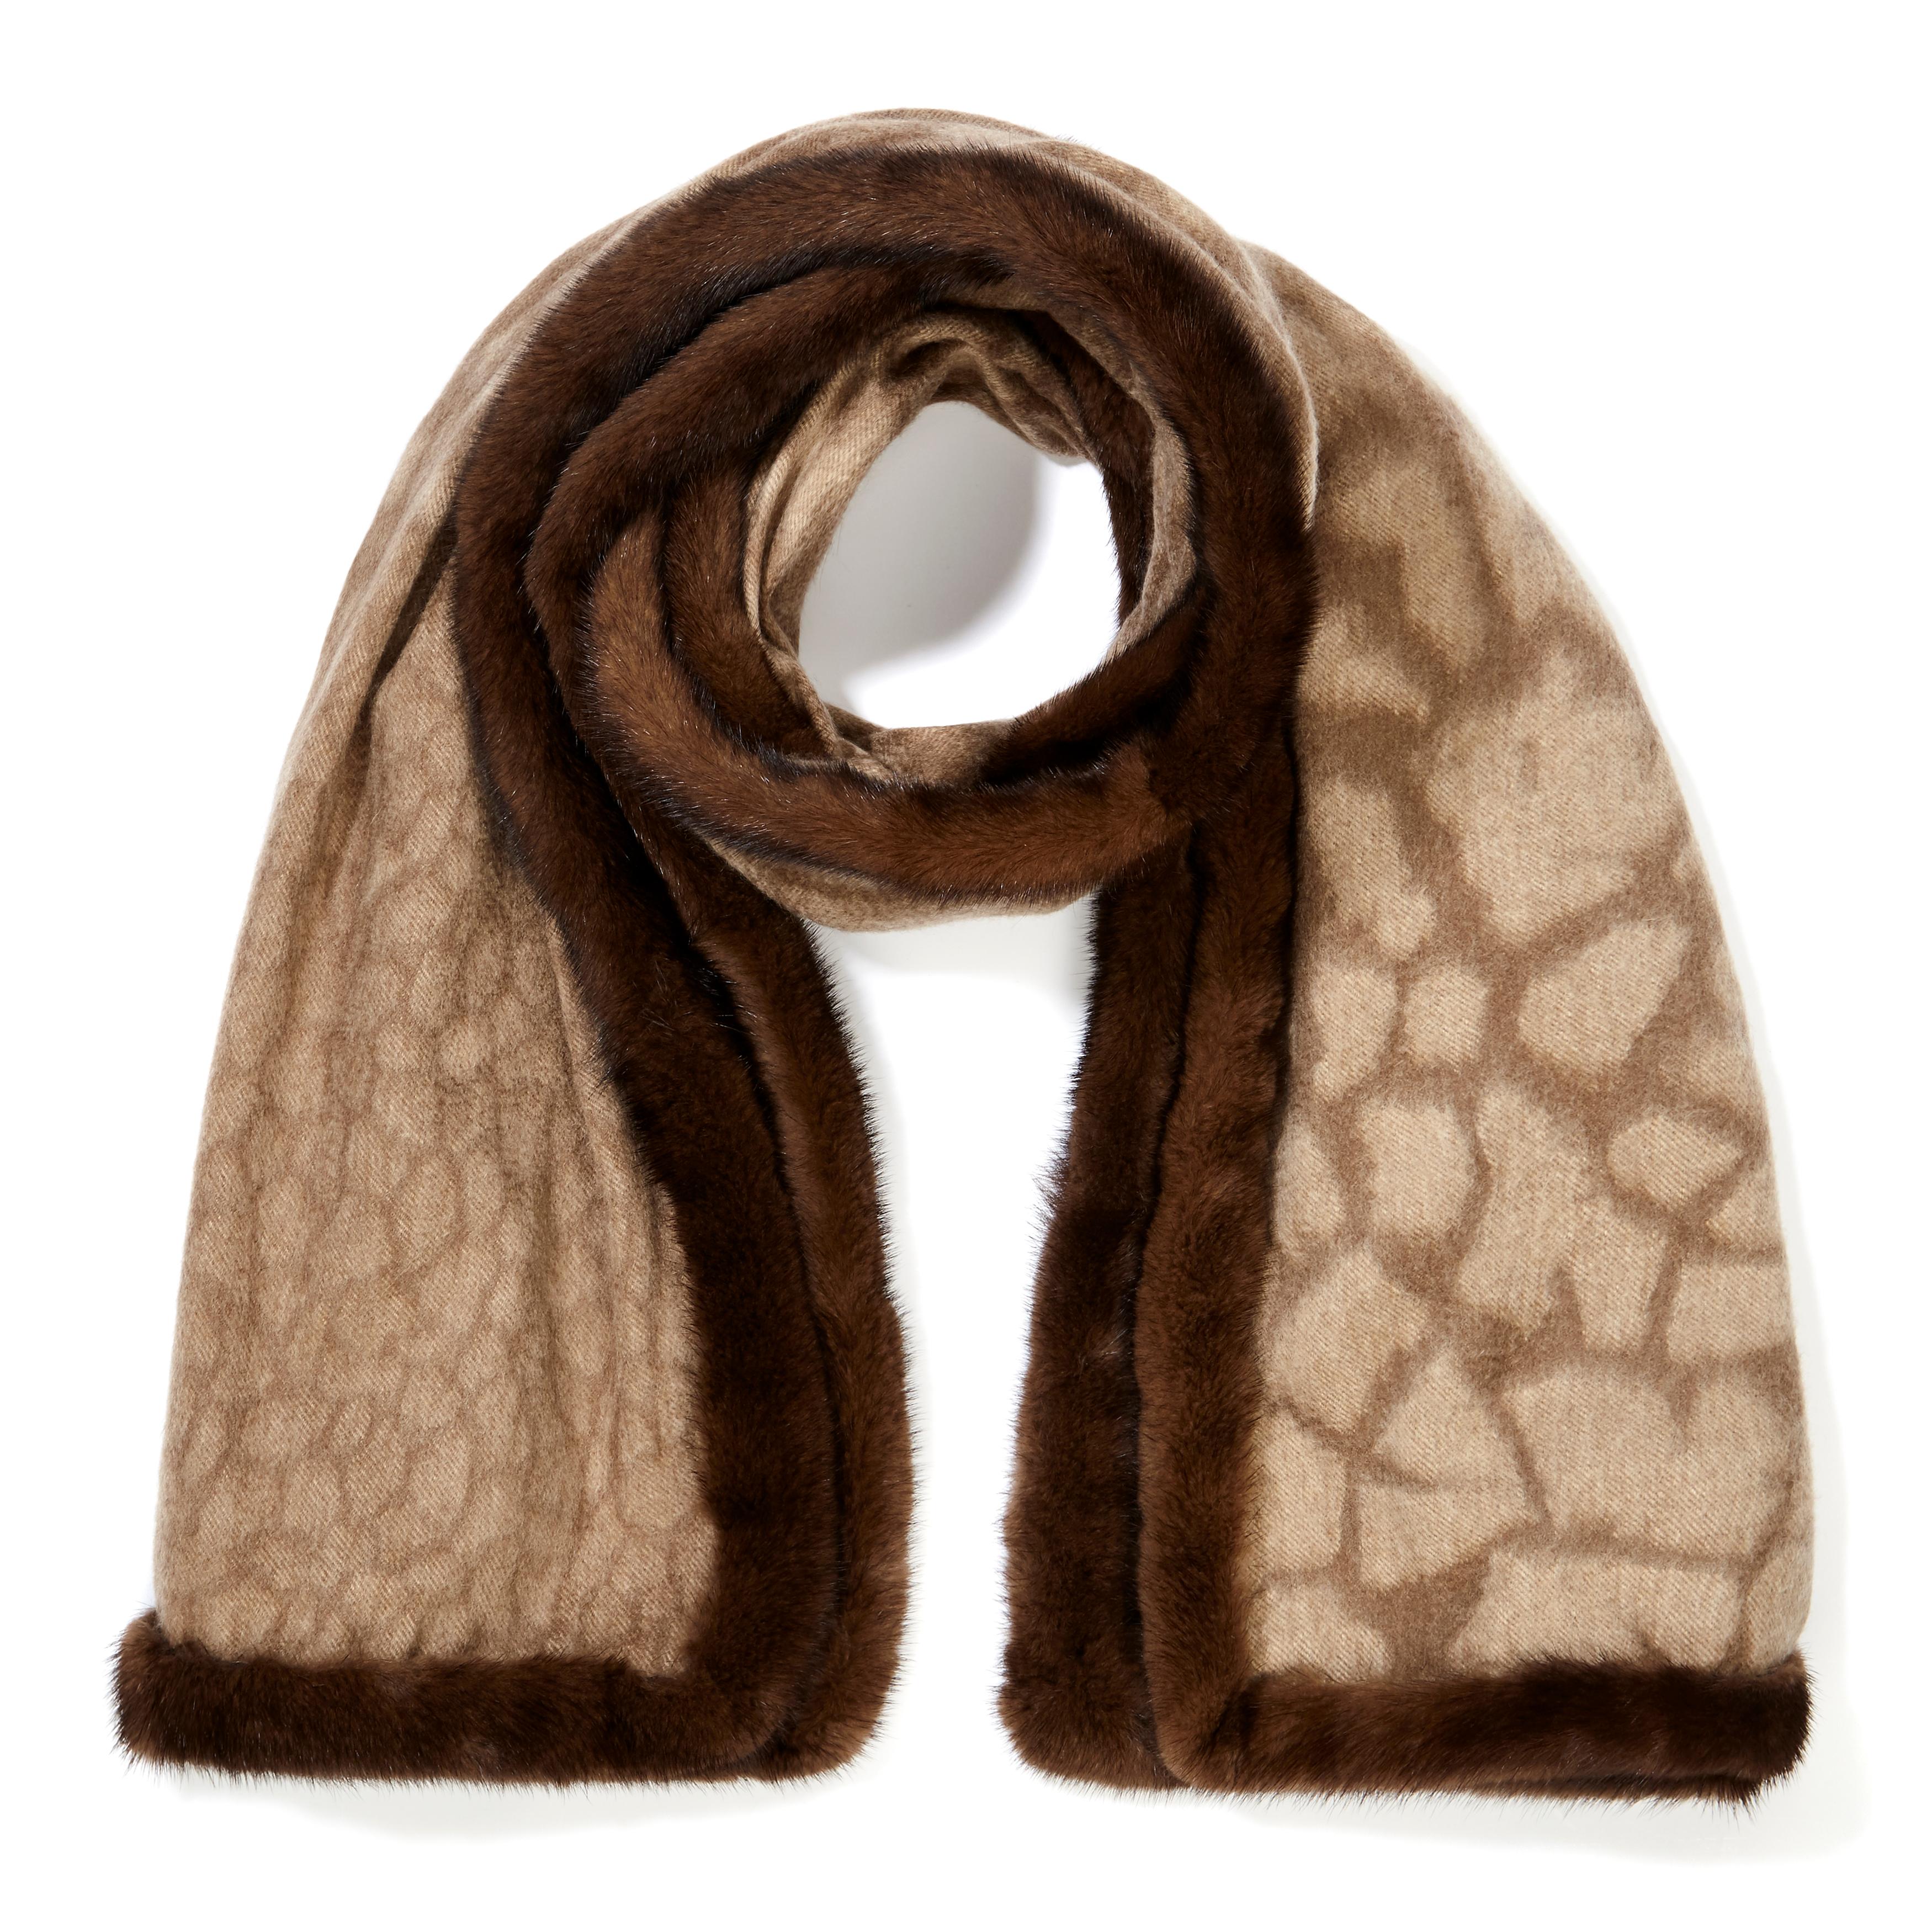 Verheyen London Mink Fur Trimmed Cashmere Scarf Shawl in Brown Leopard 

Verheyen London’s shawl is spun from the finest Scottish woven cashmere and finished with the most exquisite dyed mink. Its warmth envelopes you with luxury, perfect for travel